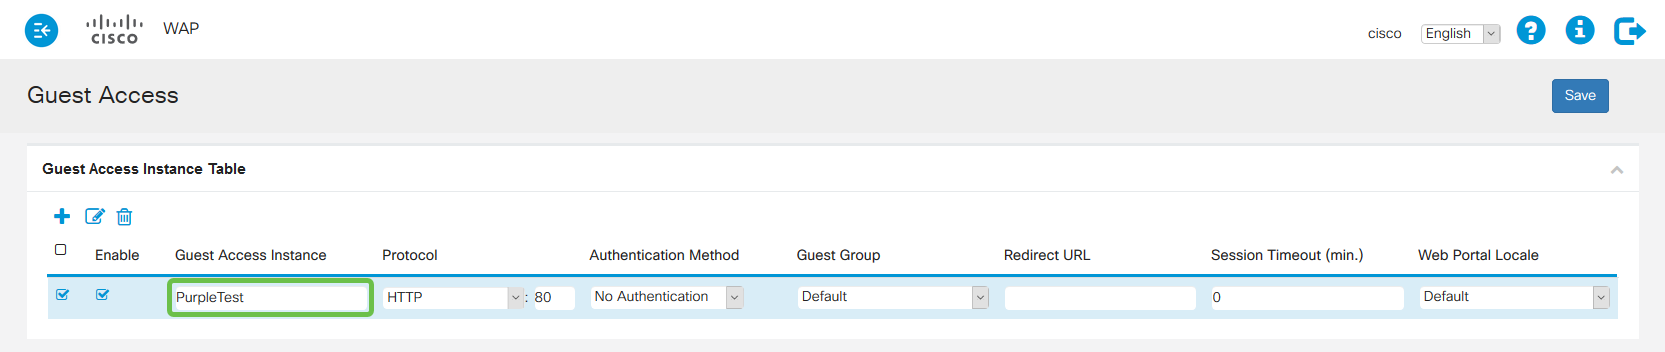 The Guest Access page, below the Guest Access Instance table, the instance name is entered as PurpleTest.